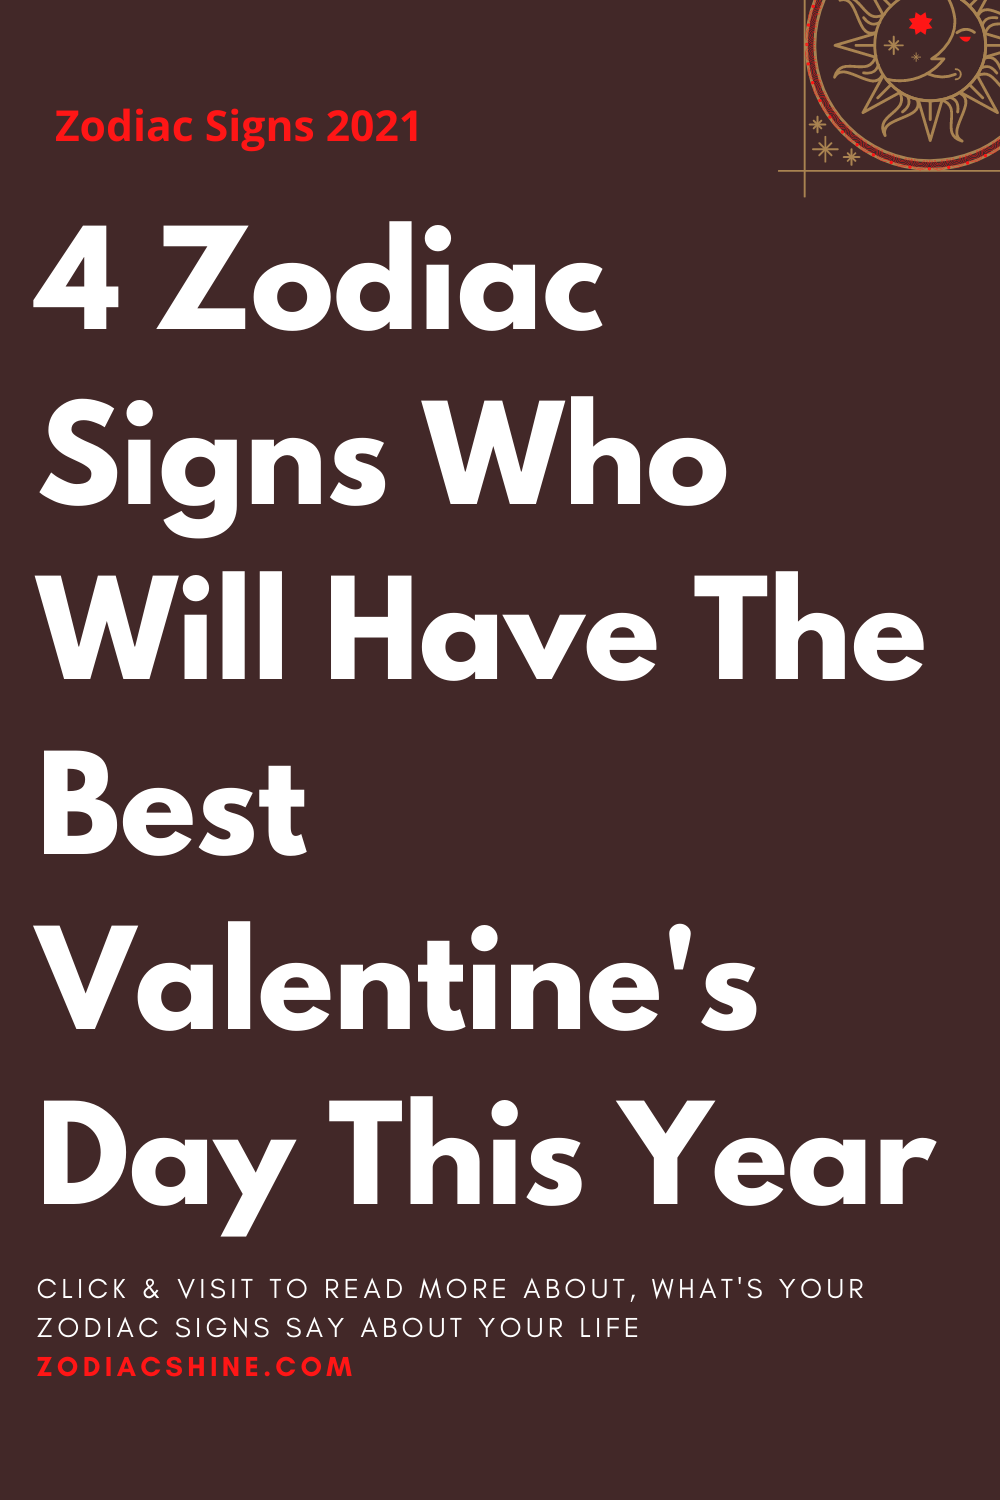 4 Zodiac Signs Who Will Have The Best Valentine's Day This Year